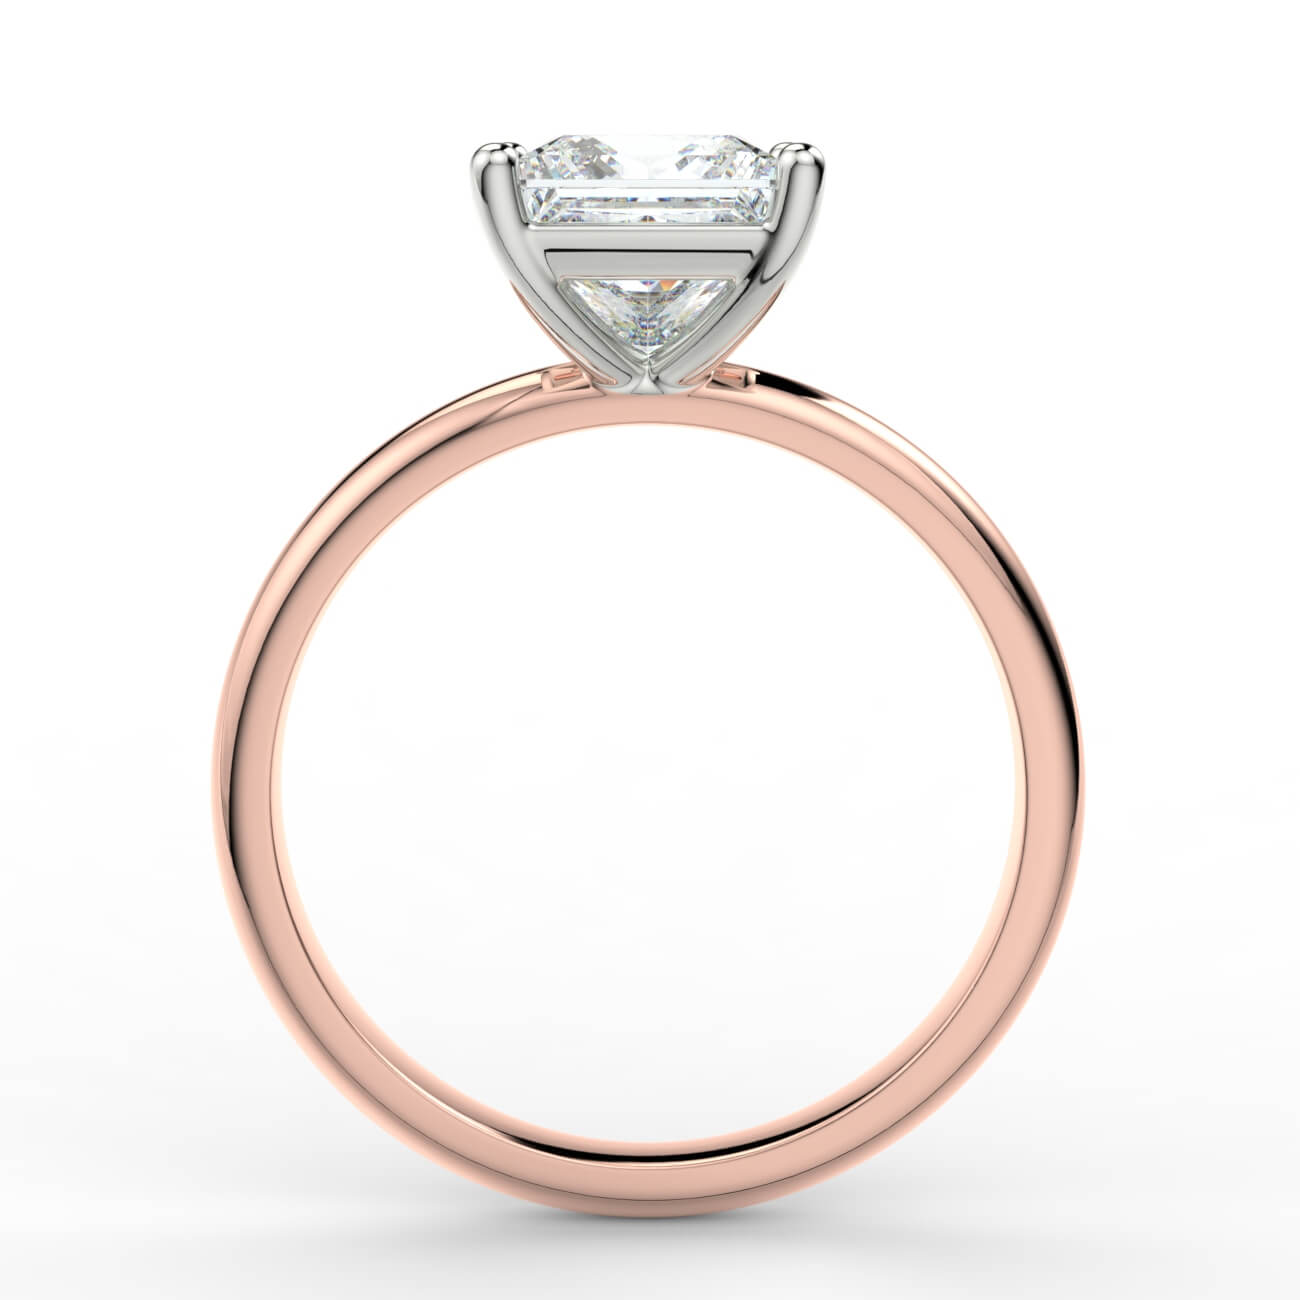 Solitaire princess cut diamond engagement ring in rose and white gold – Australian Diamond Network